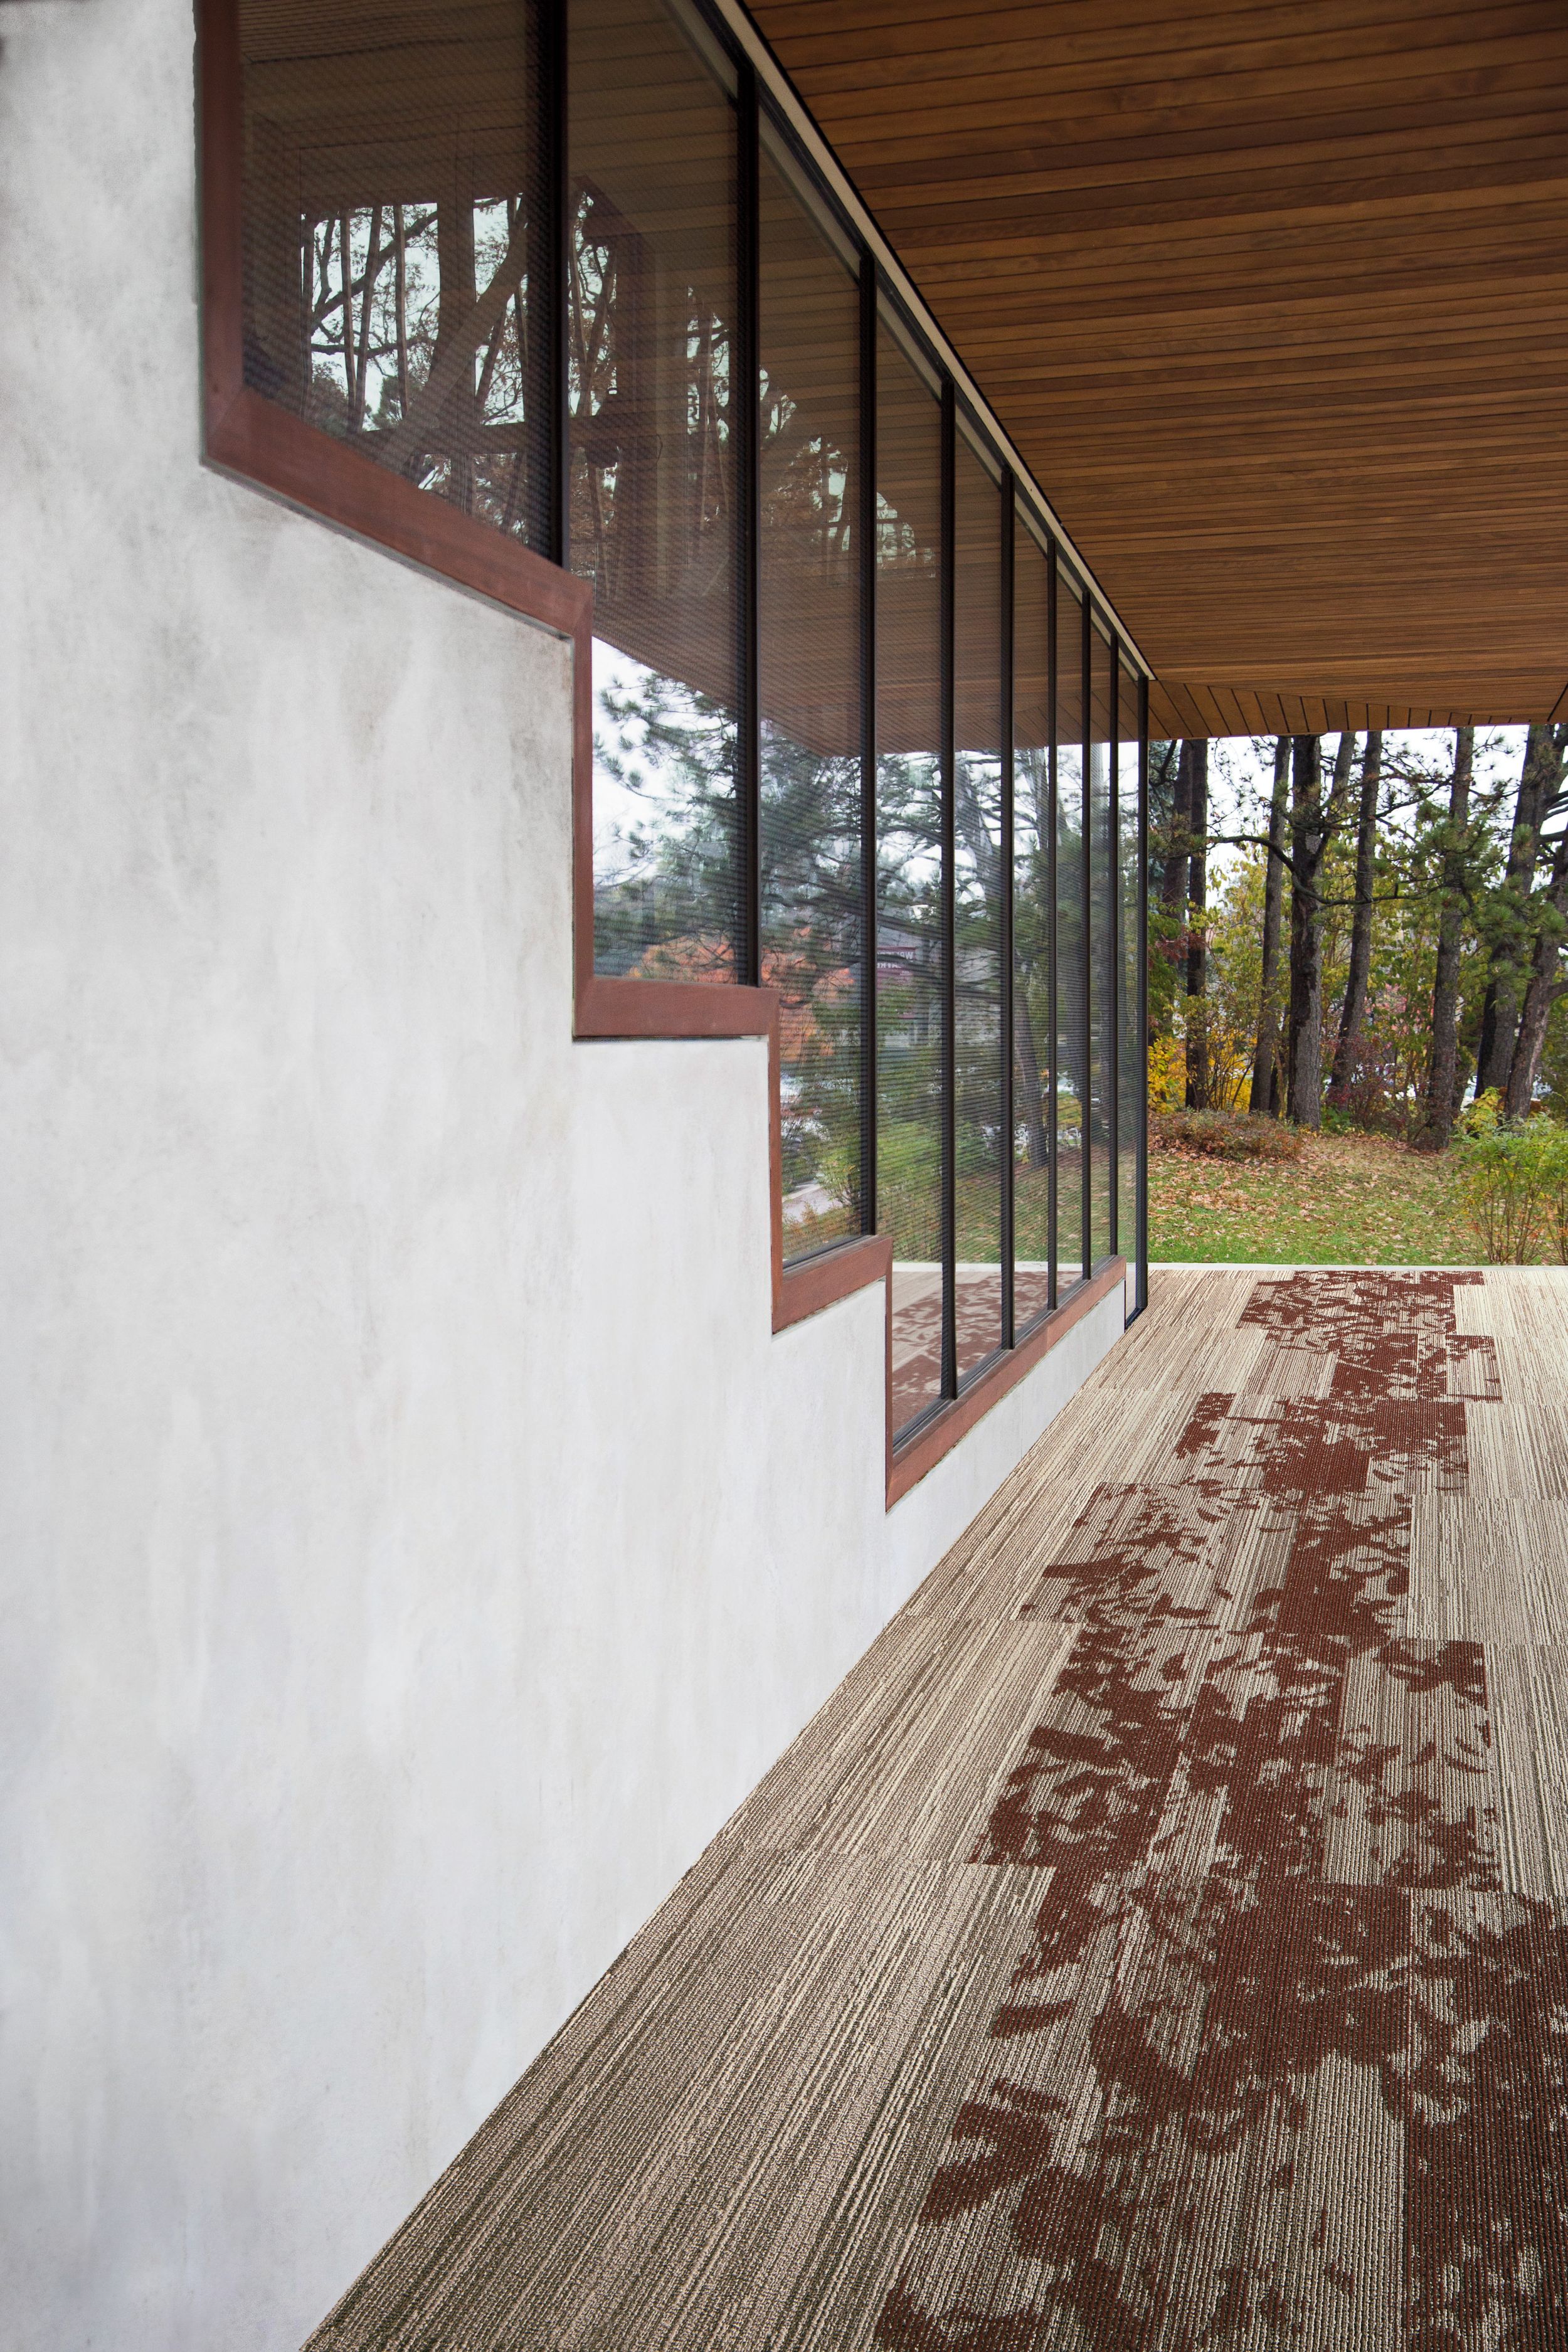 Interface Progression III and Glazing plank carpet tile shown for inspiration in outdoor setting imagen número 8